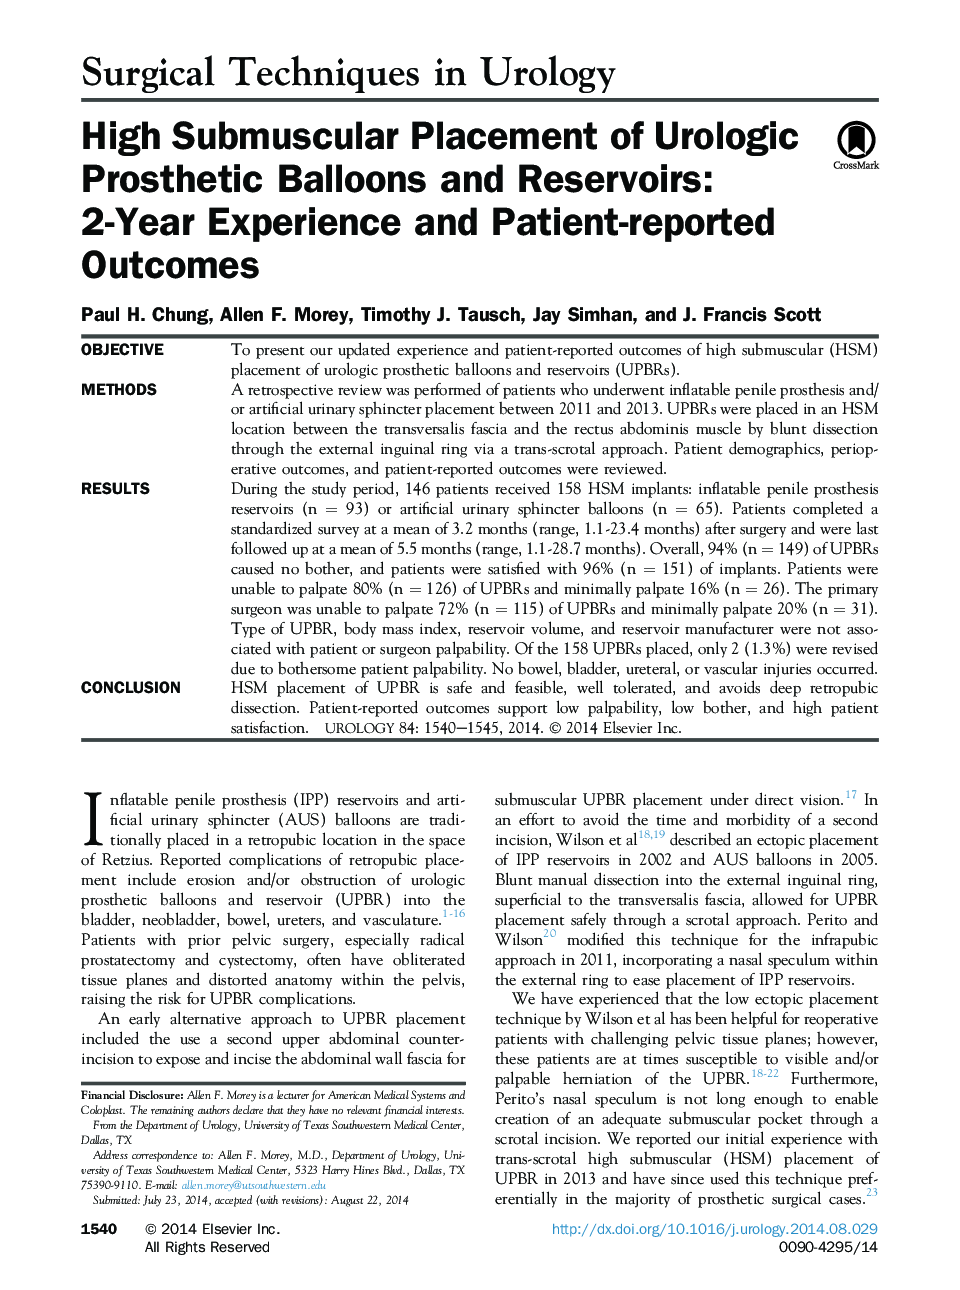 High Submuscular Placement of Urologic Prosthetic Balloons and Reservoirs: 2-Year Experience and Patient-reported Outcomes 